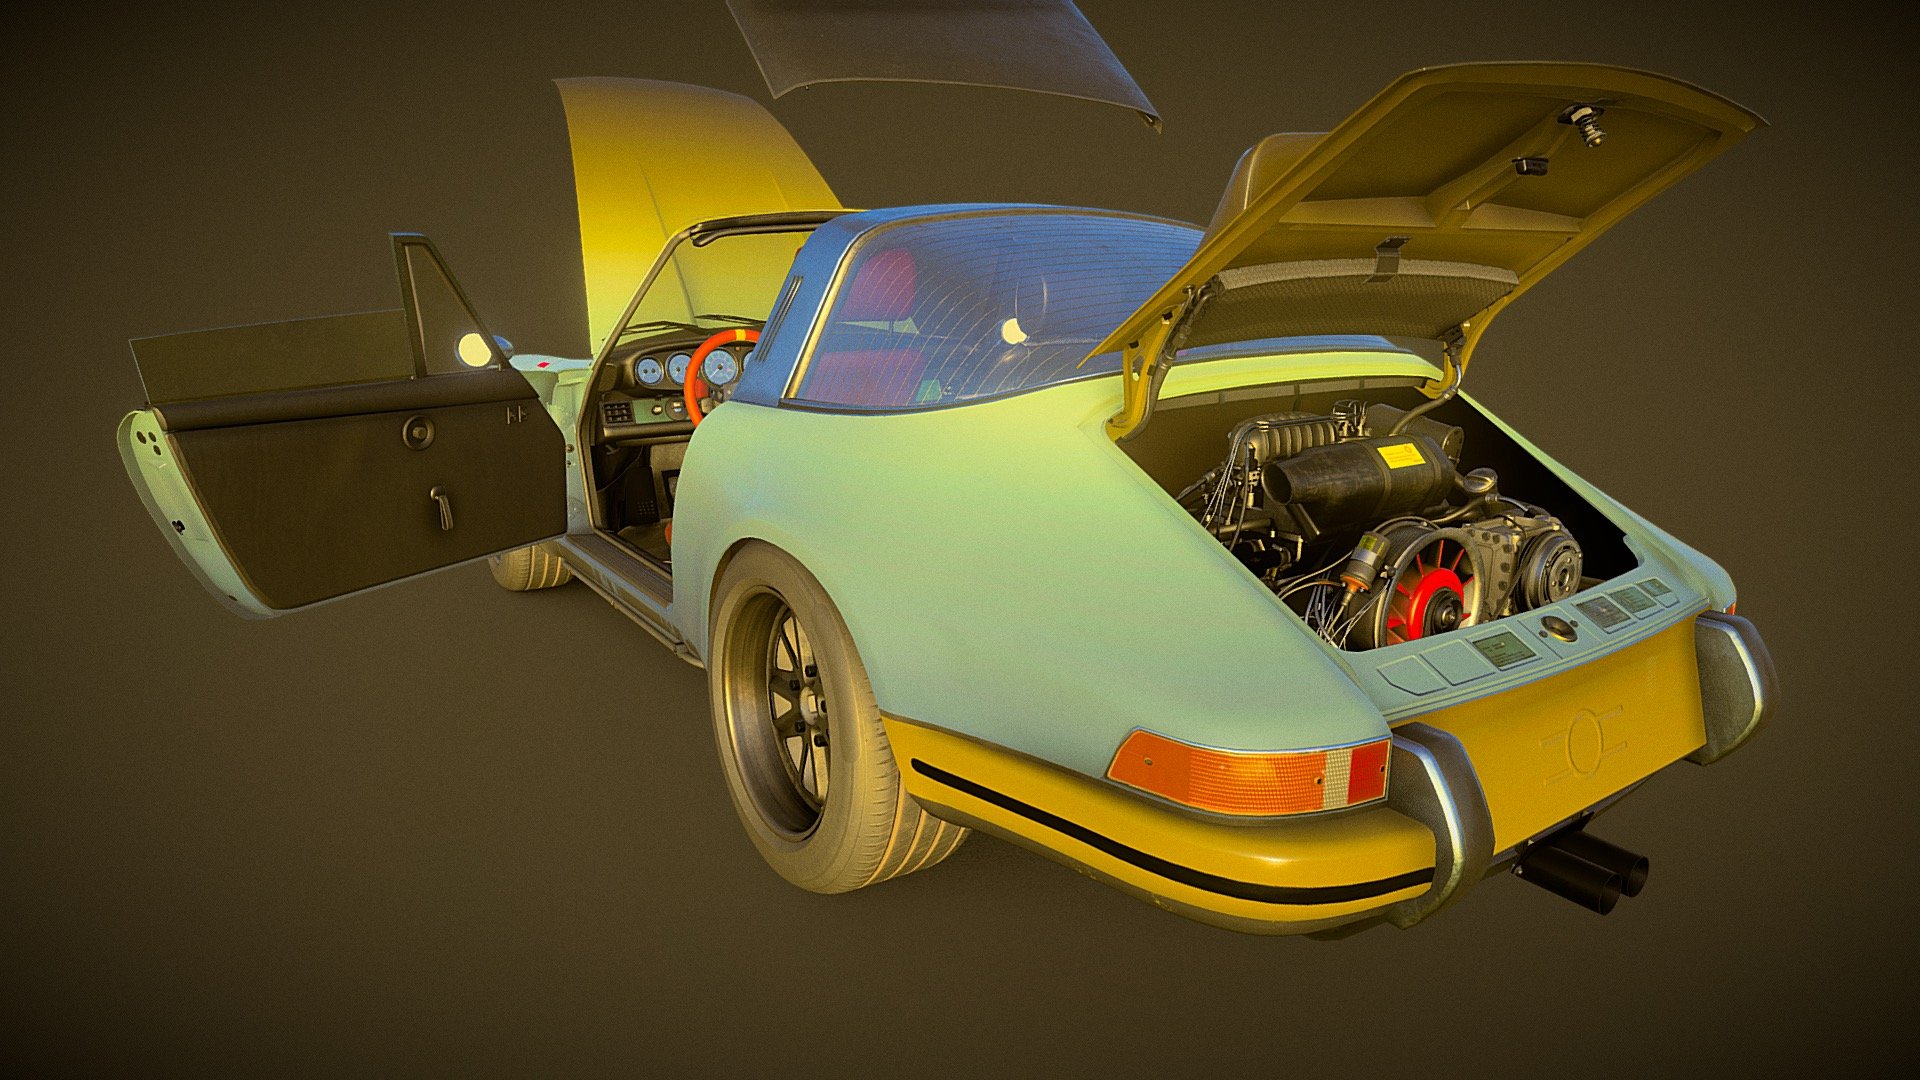 A backdate (outlaw) model of a 911 (1979) Targa ST. It's a custom version based on existing outlaw models.
The model is complete, unwapped and textured. I didn't bake the textures so you can make adjustments and bake it yourself - it contains quite a lot of separate texture sets. 
The animation is just to demo the inside.

The model contains all the details you can see in this base model: 911SC - Porsche 911 Backdate Targa - Buy Royalty Free 3D model by PROKOP (@davidgulla) 3d model